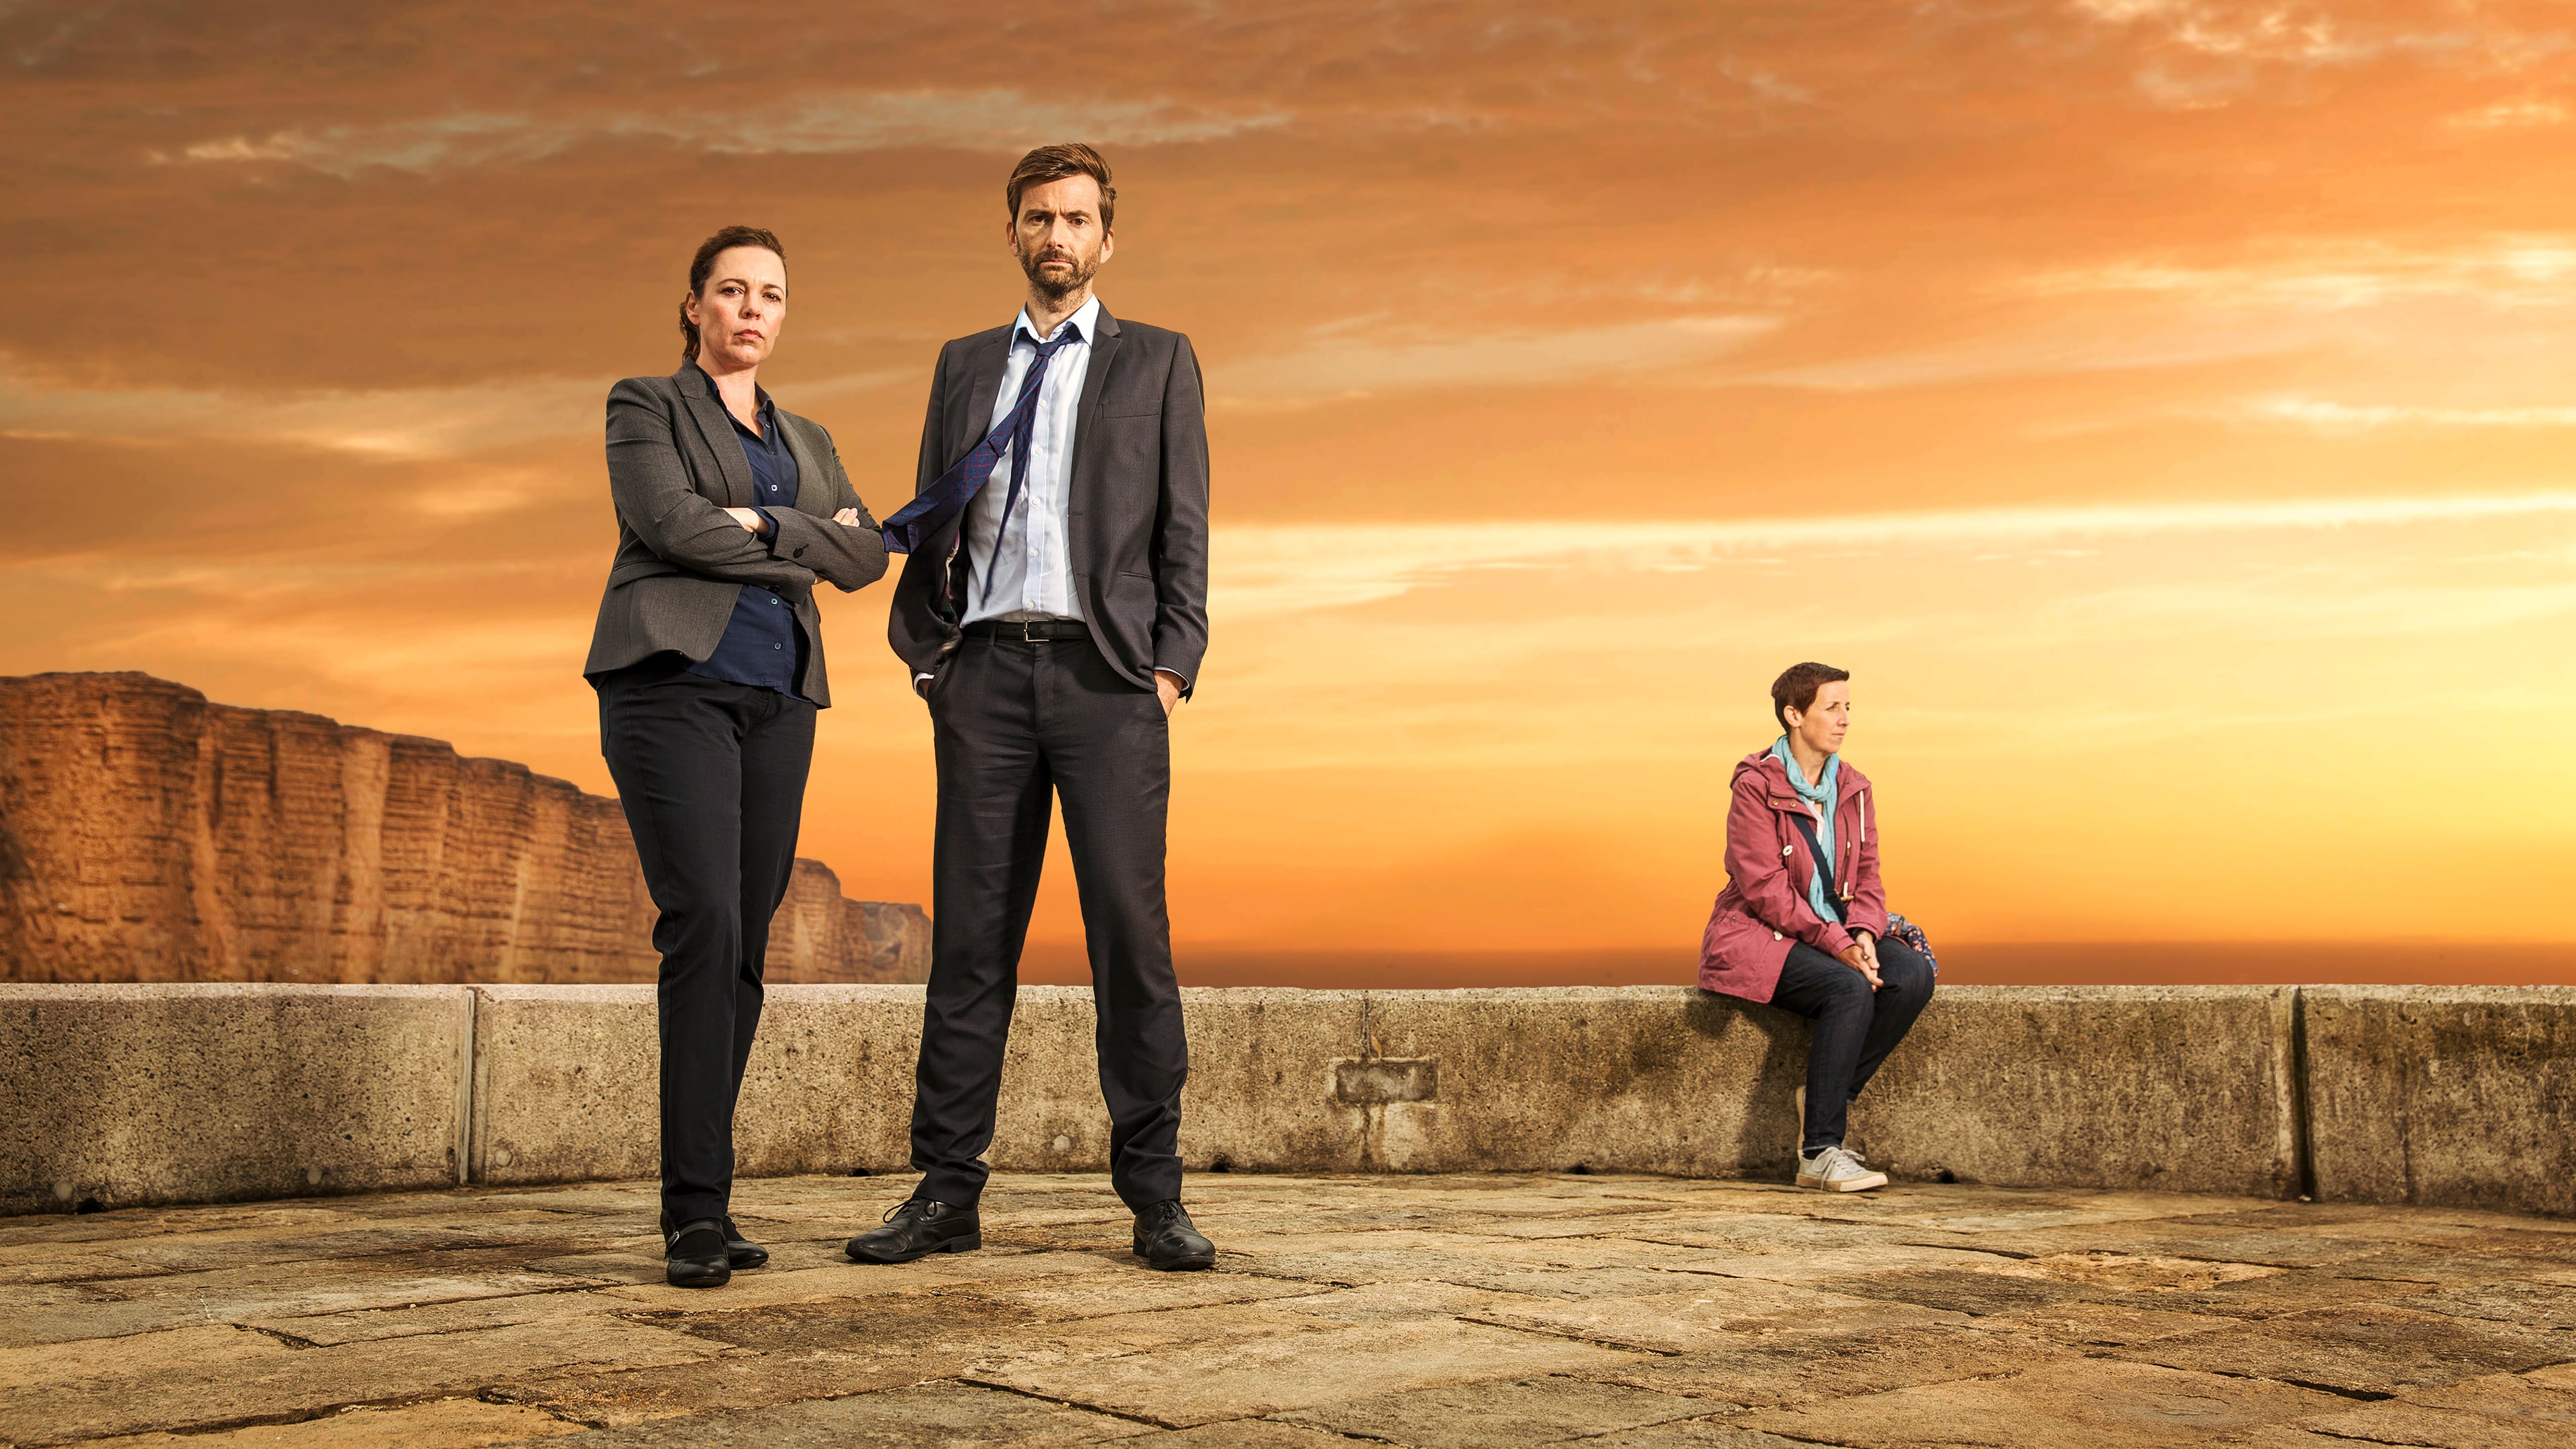 Backdrop Image for Broadchurch